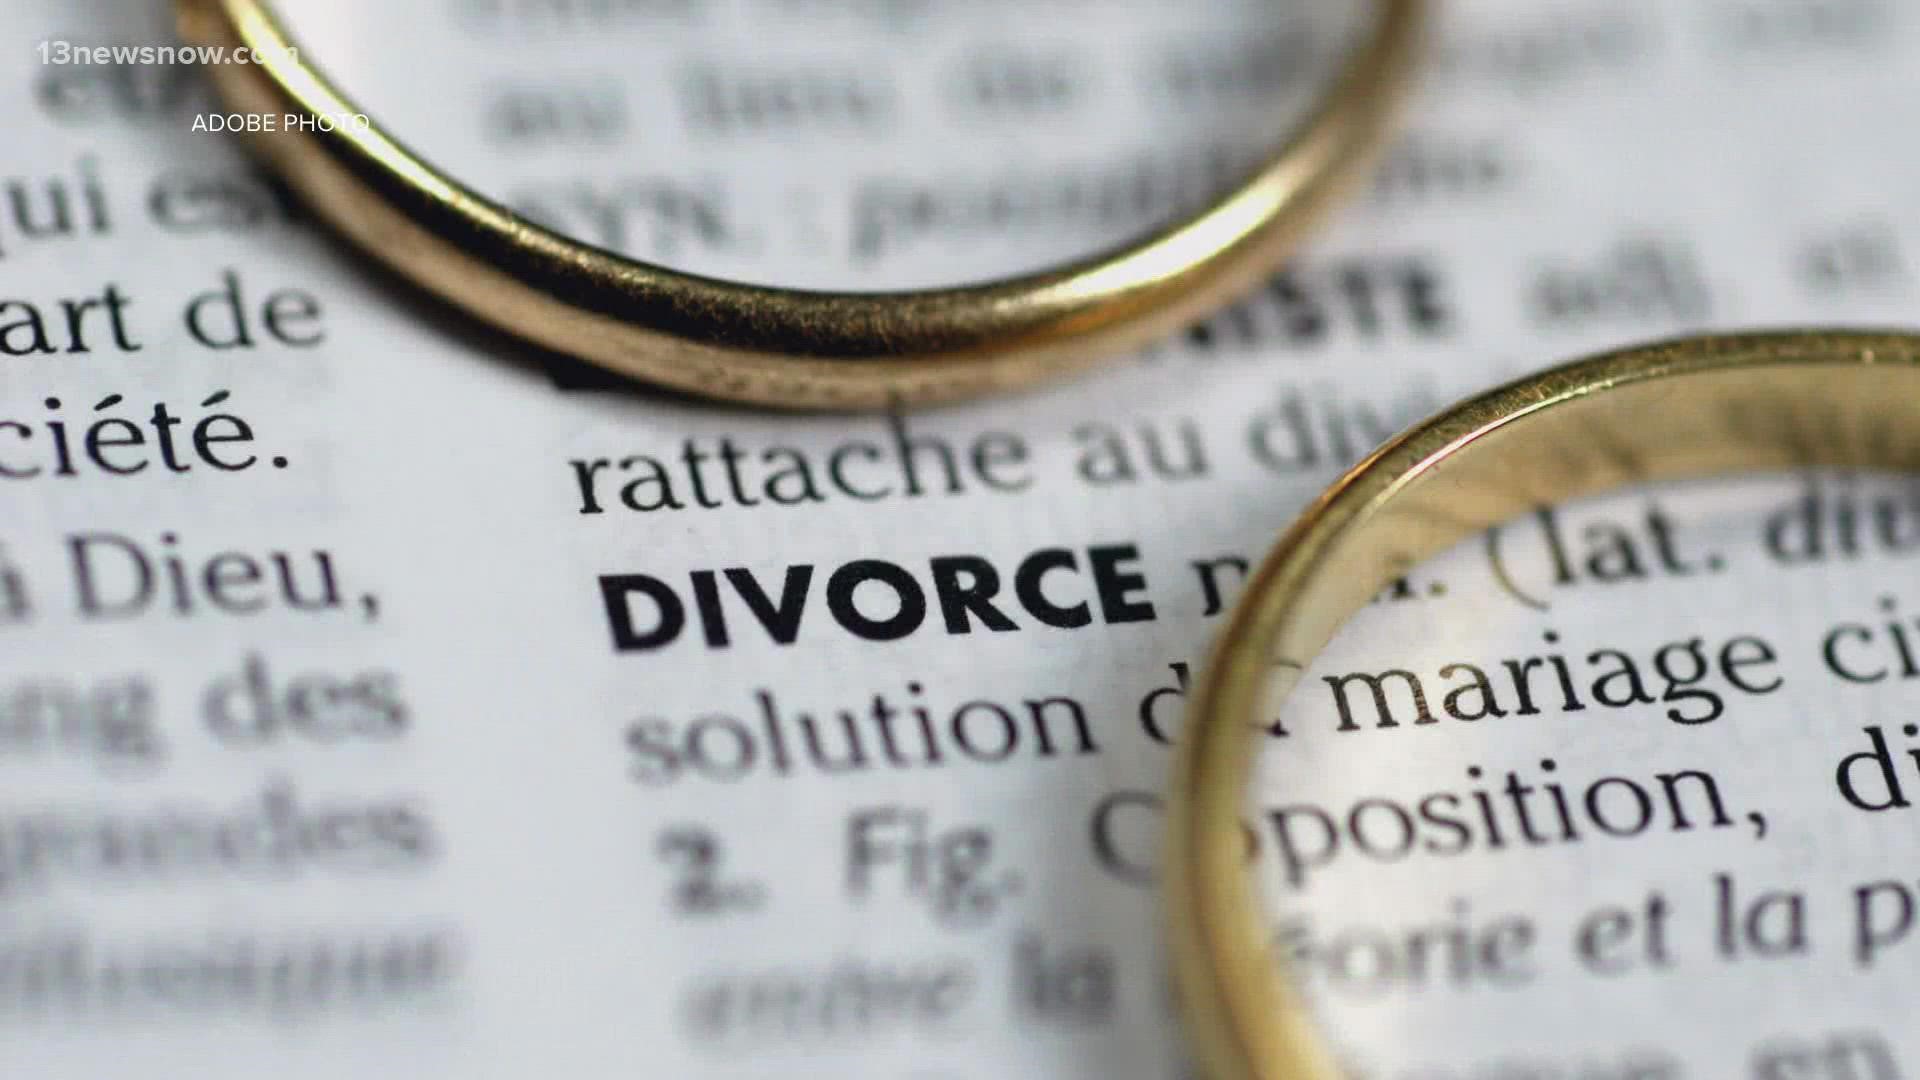 A divorce cannot be legally finalized in Missouri if the wife is pregnant, but spouses can still begin certain aspects of the divorce process.